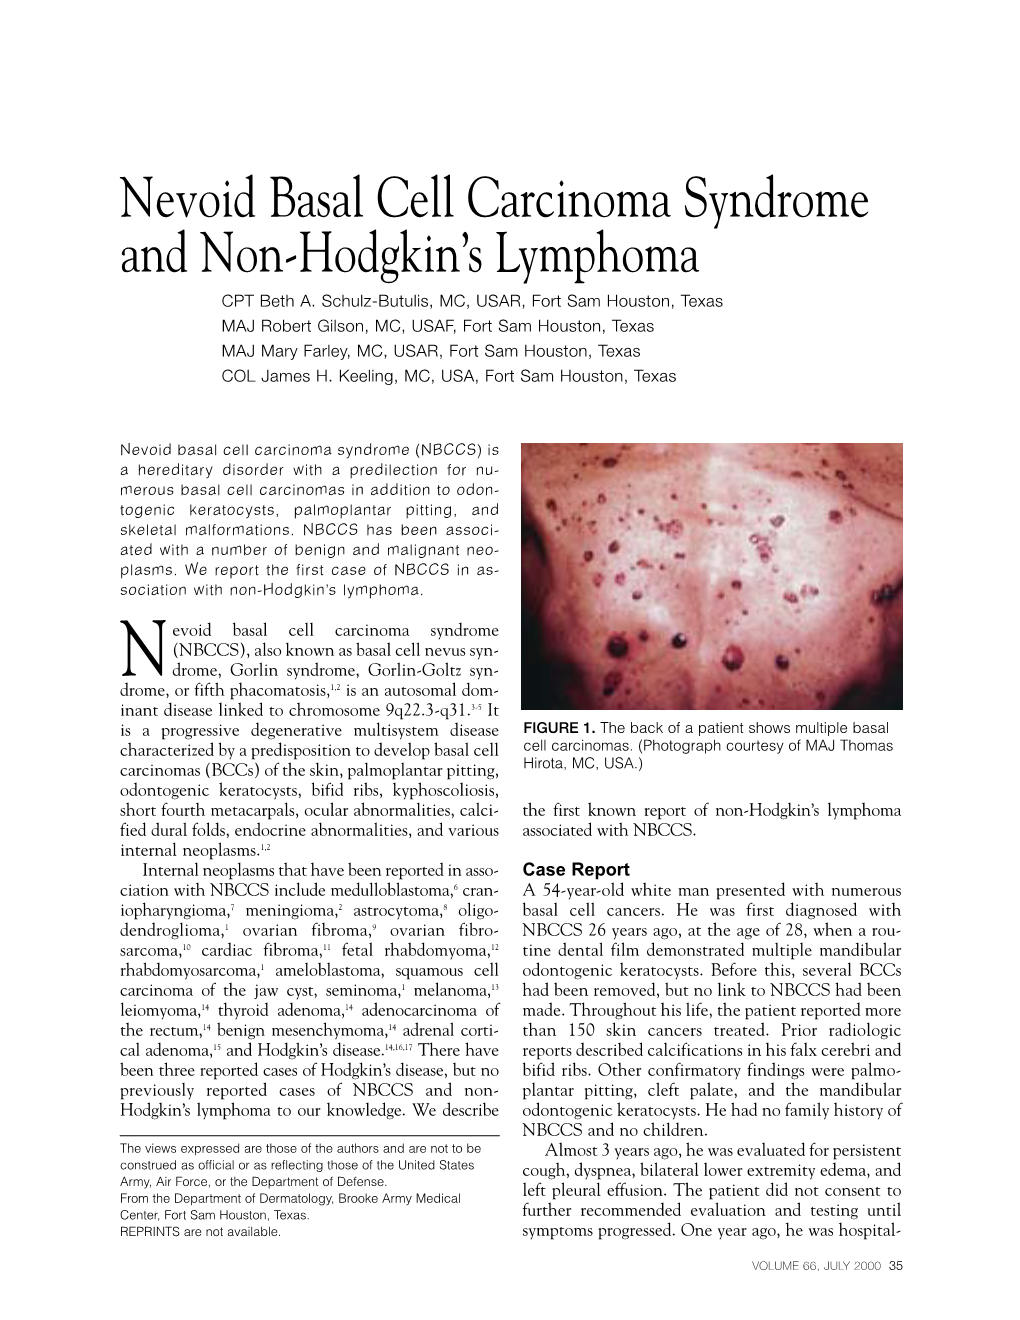 Nevoid Basal Cell Carcinoma Syndrome and Non-Hodgkin's